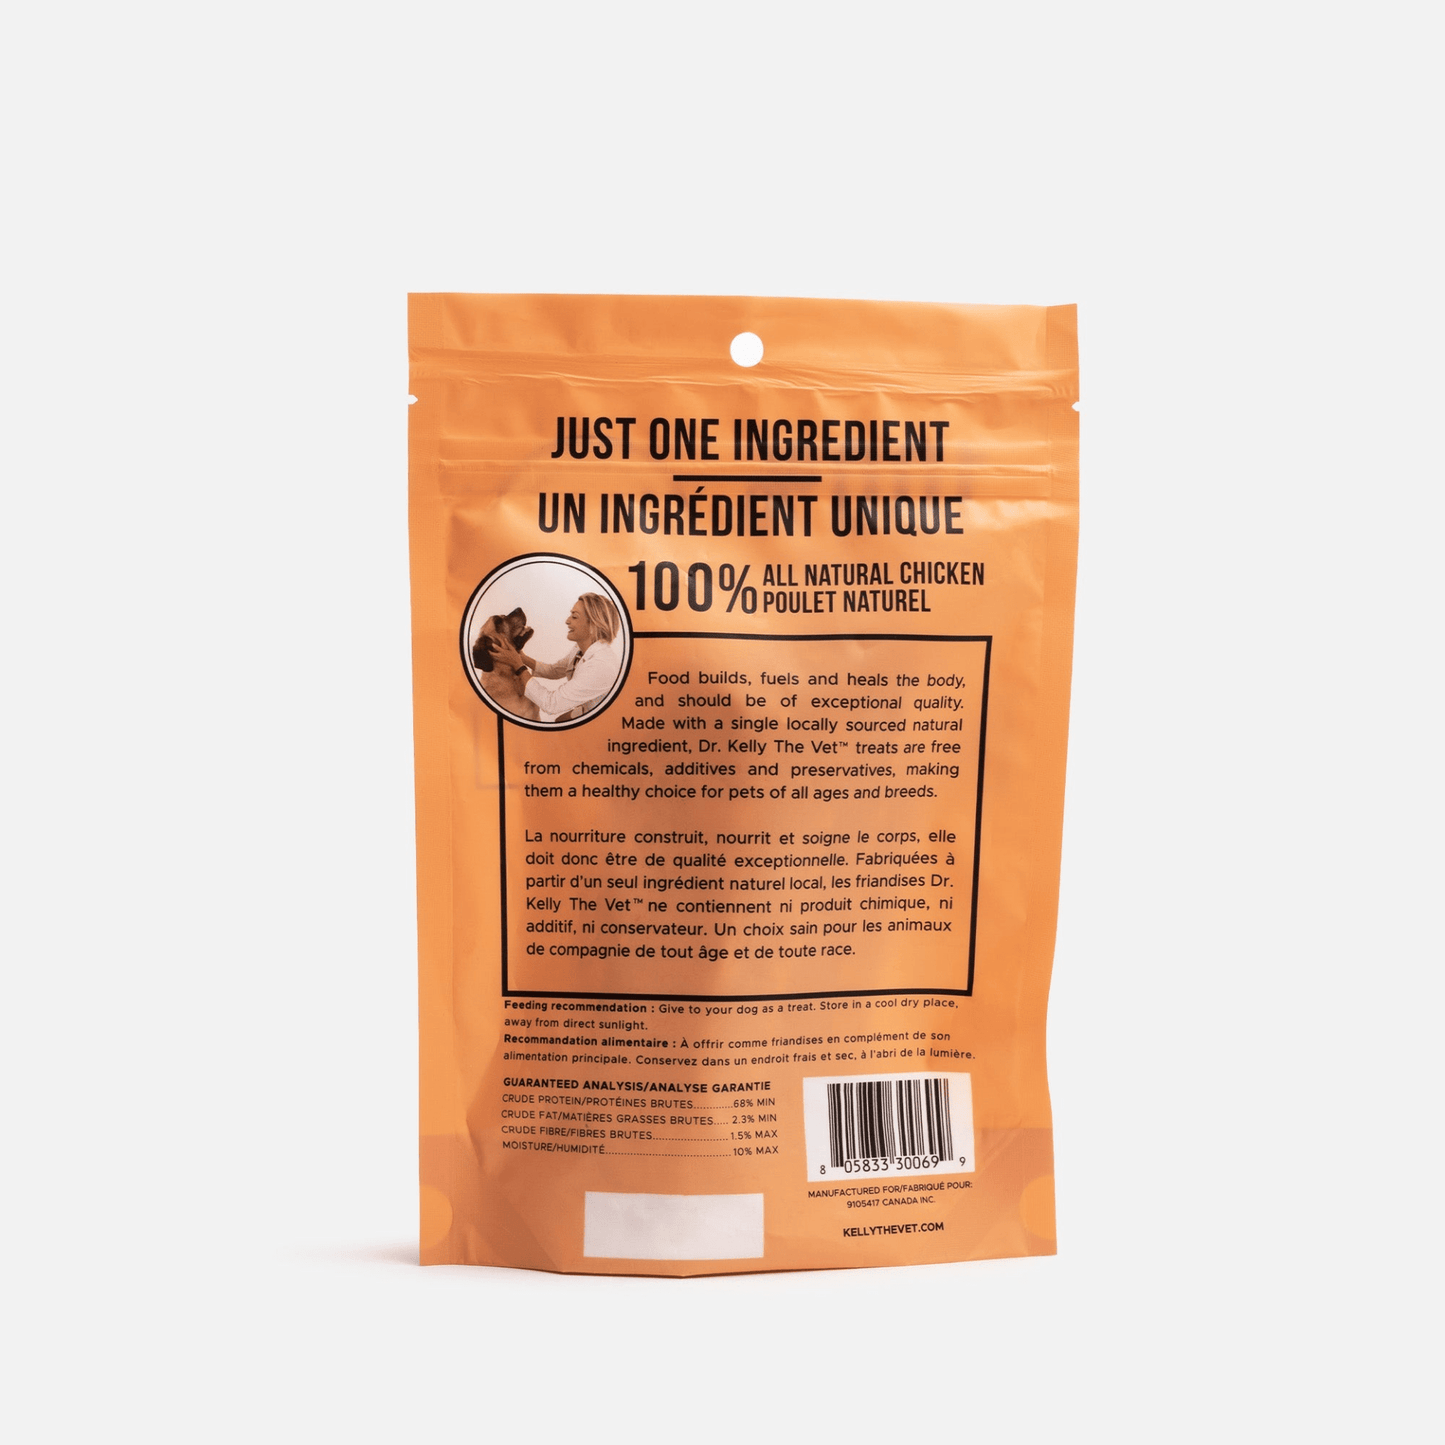 Dog and Pet Stuff 100g / 3.53 oz Dr. Kelly The Vet 100% Natural Dog Treats - Chicken